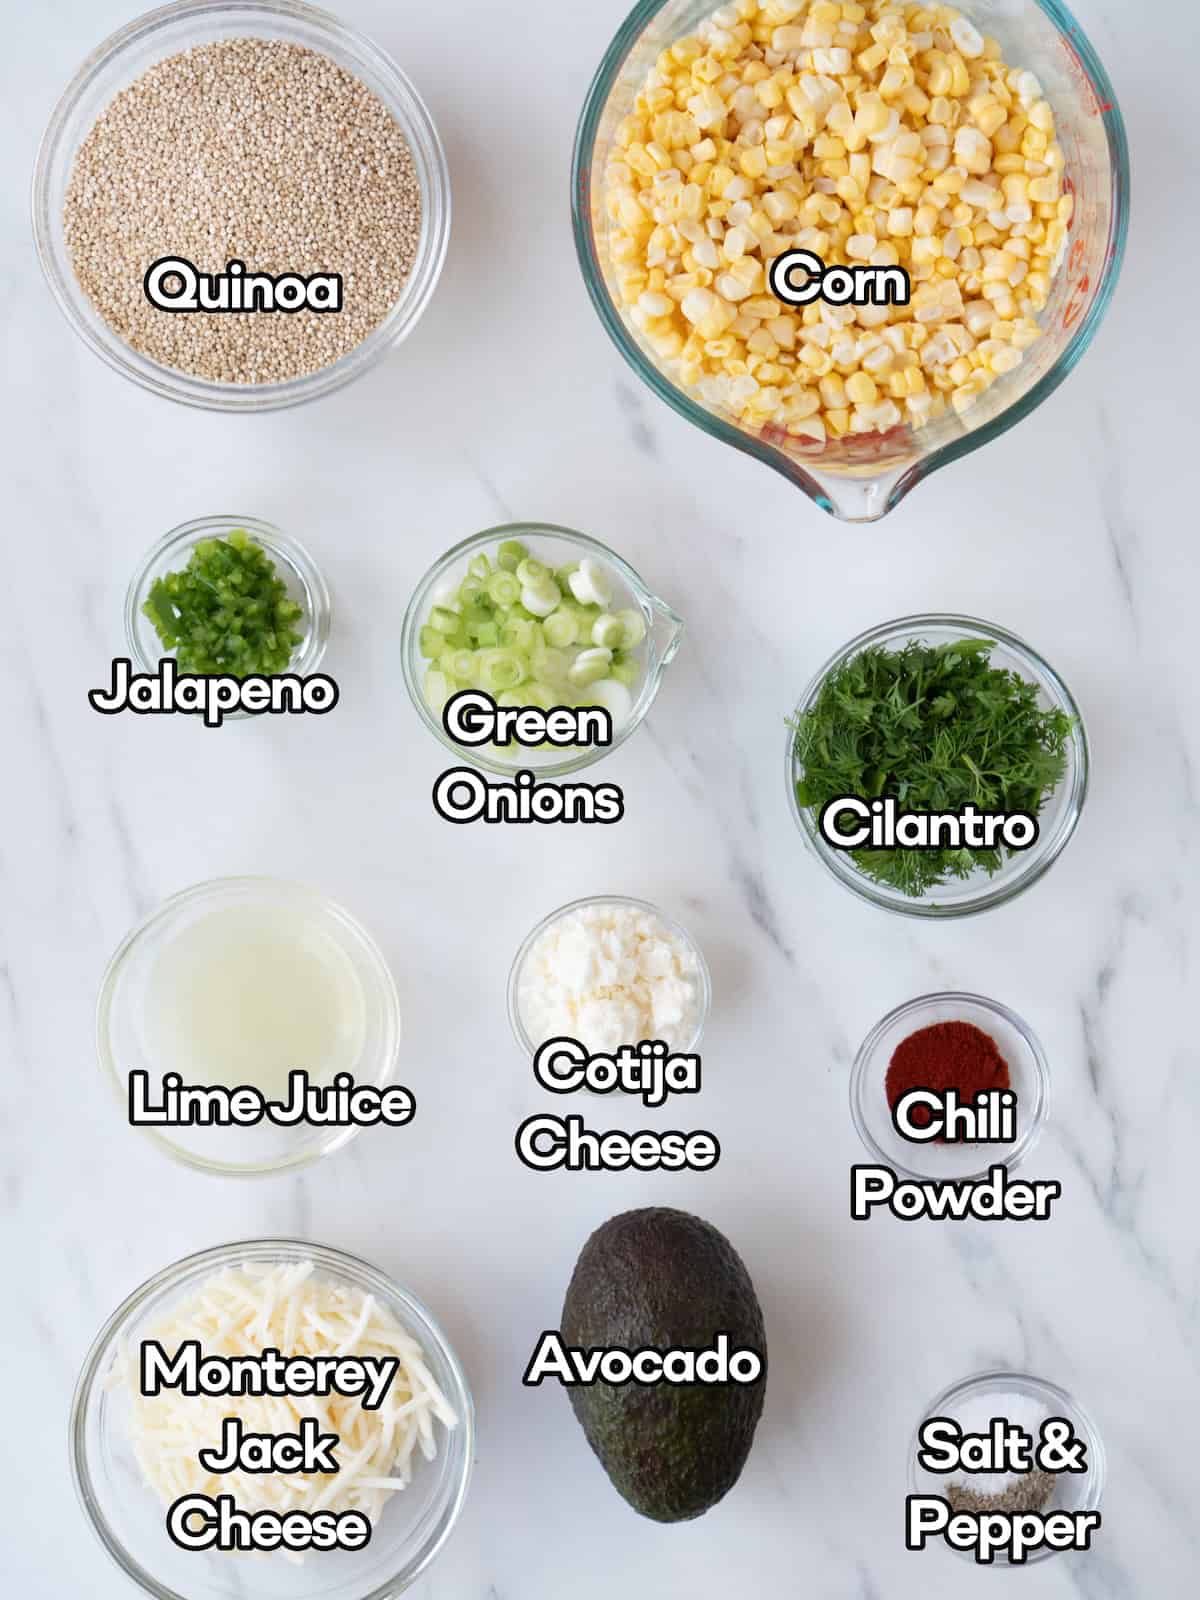 Mise en place of all ingredients to make Mexican corn and quinoa salad.